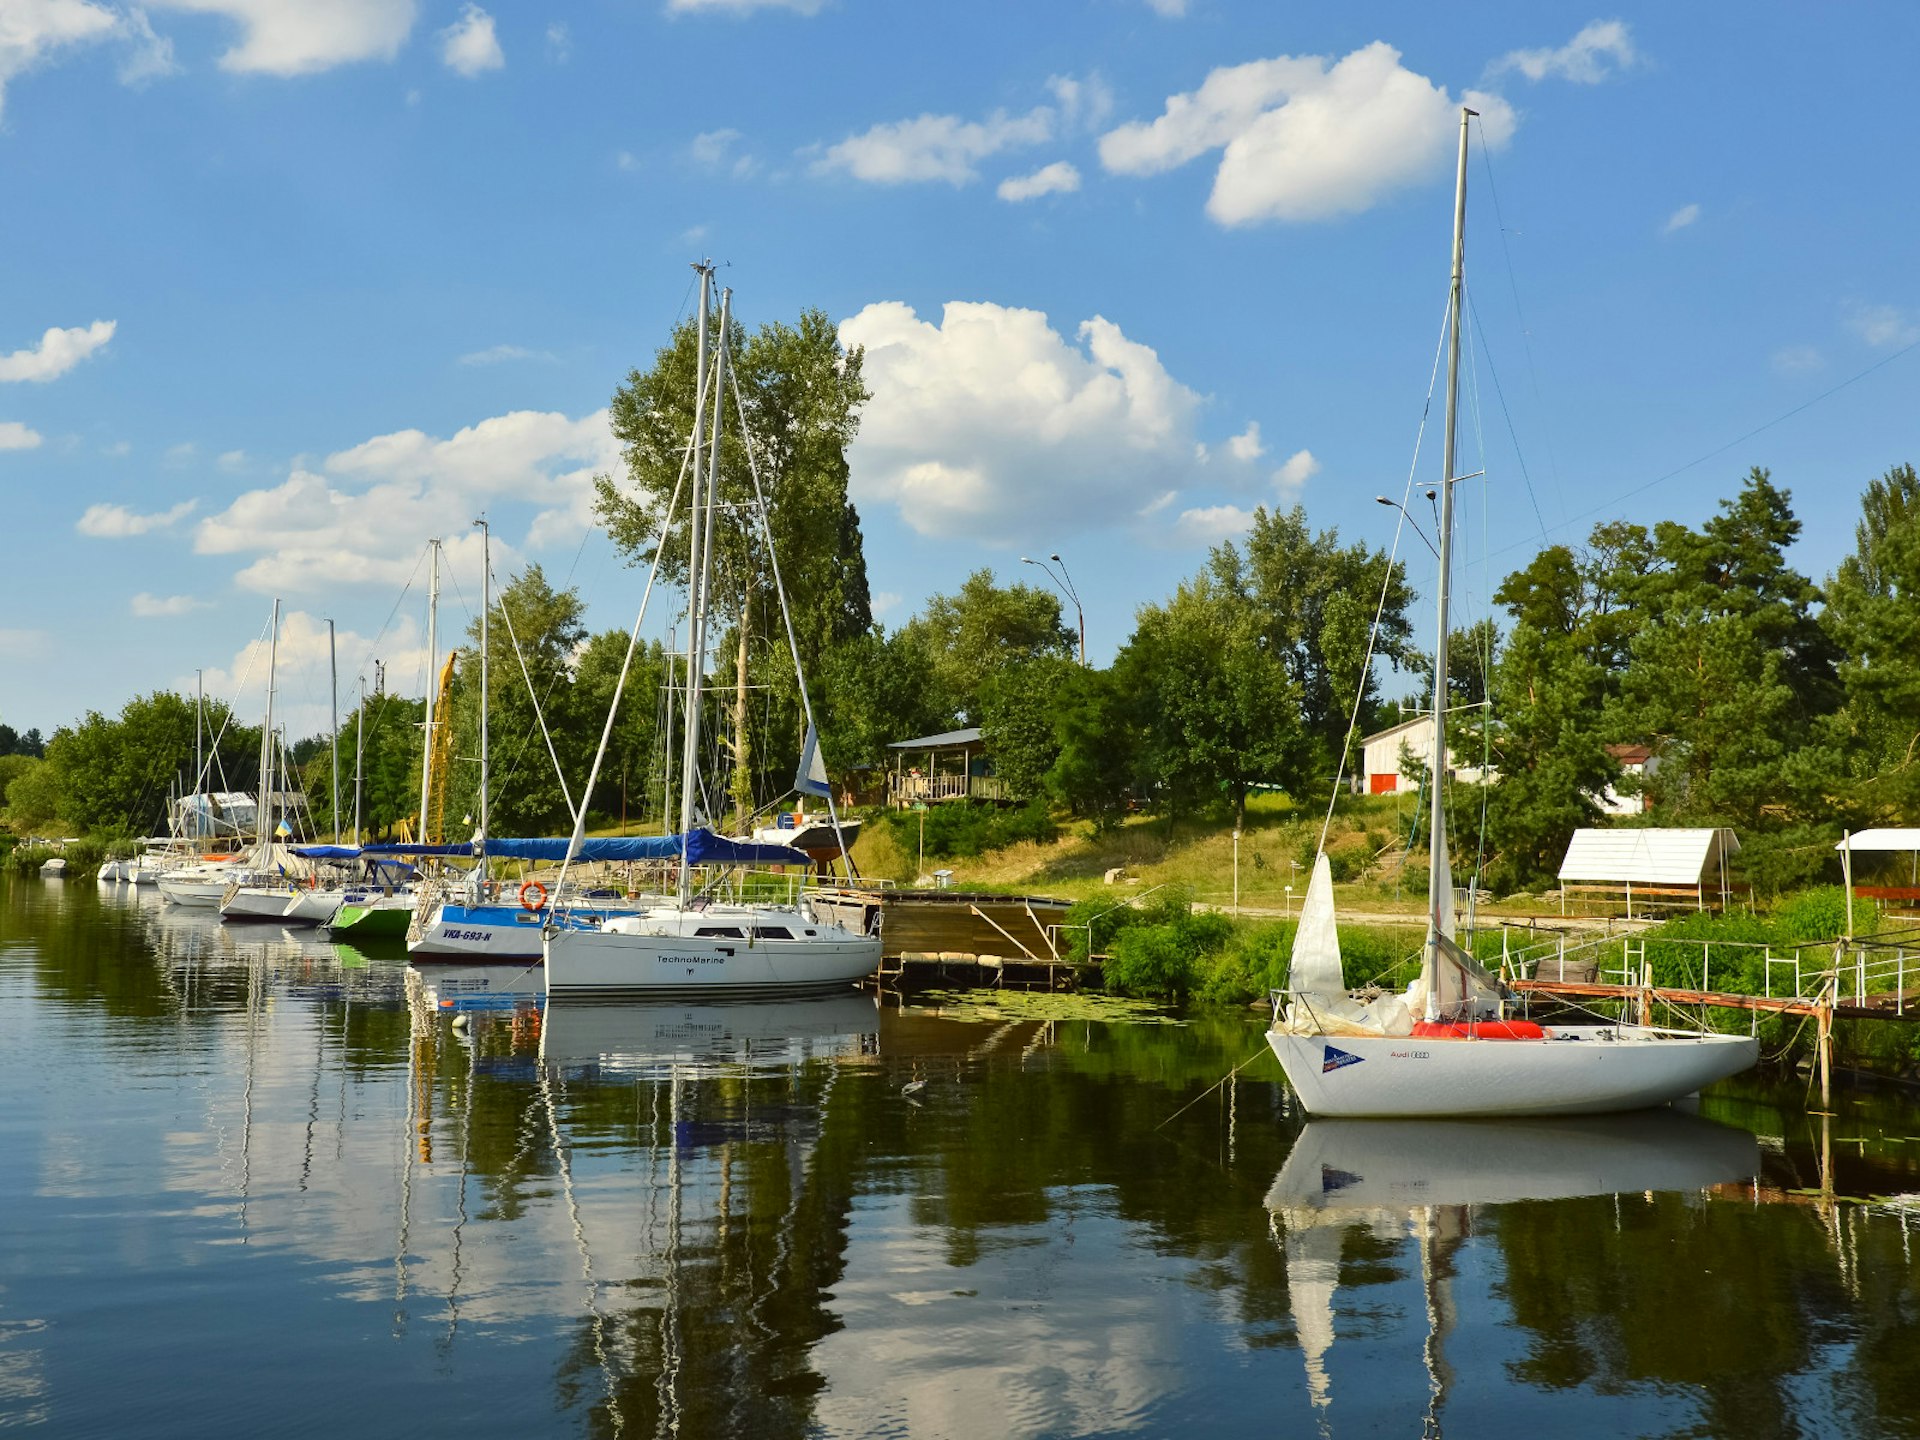 Sailboats on the Dnipro river in Kyiv © Liveoak / Shutterstock